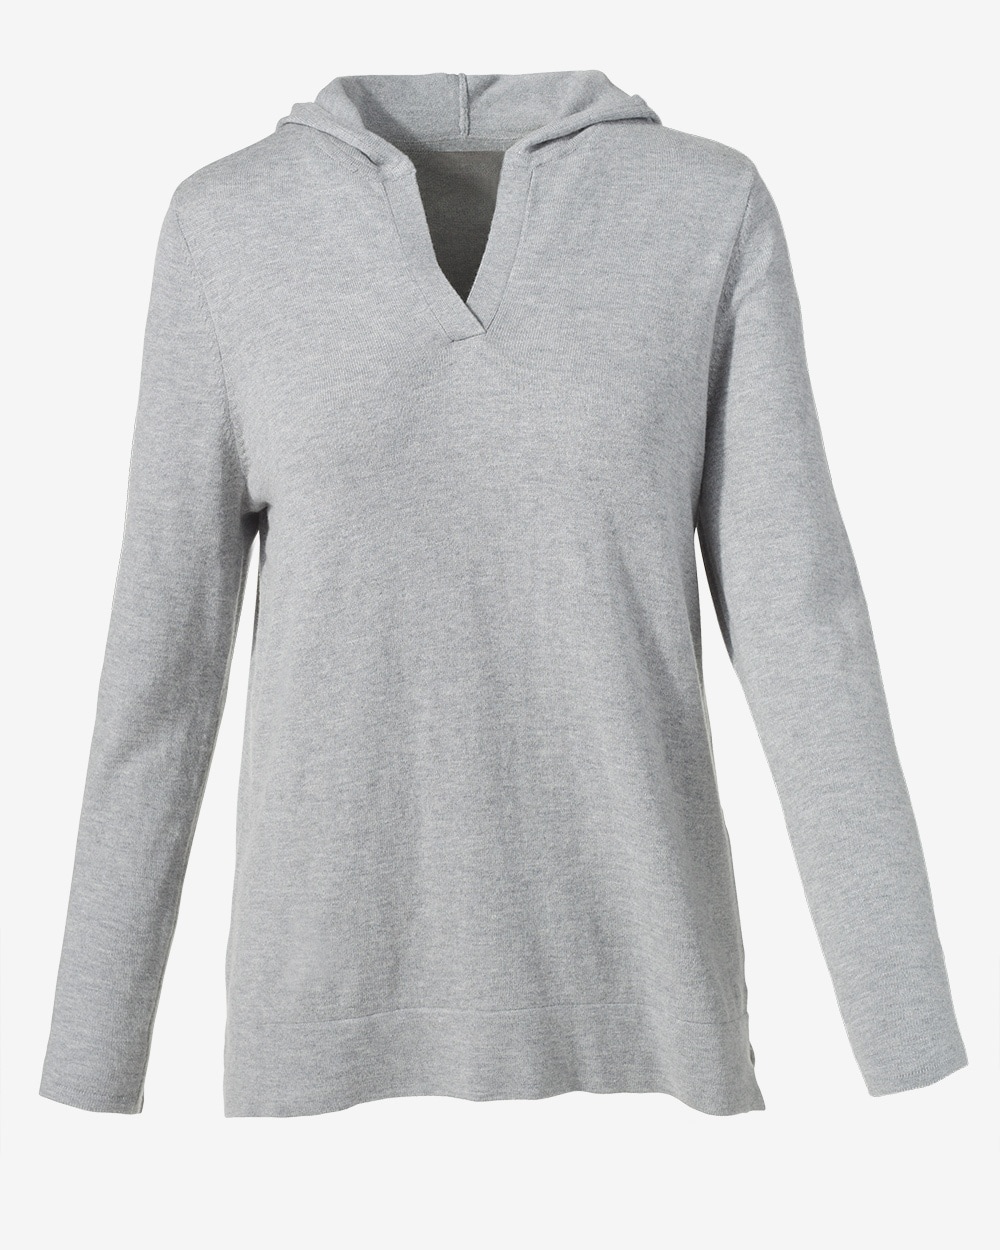 Notch-Neck Hooded Pullover